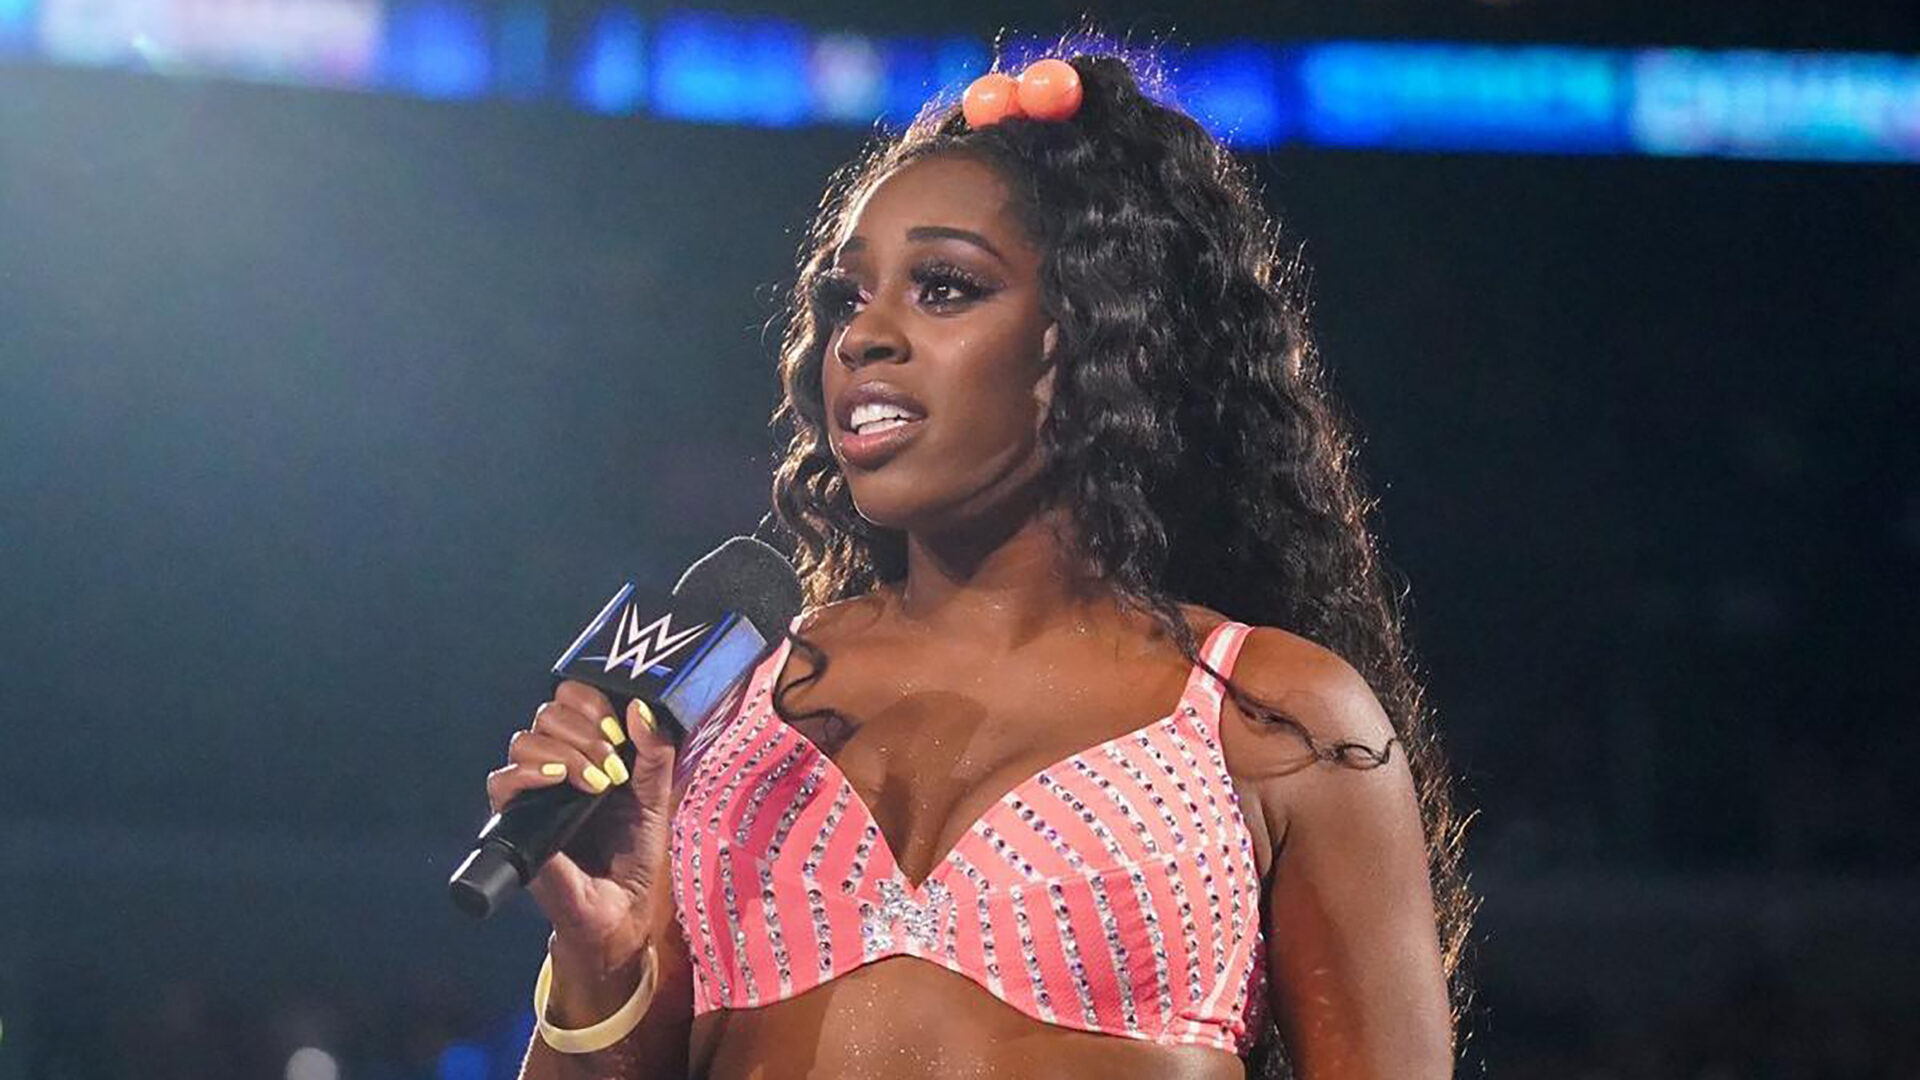 Naomi Breaks Her Silence After Being Suspended From WWE